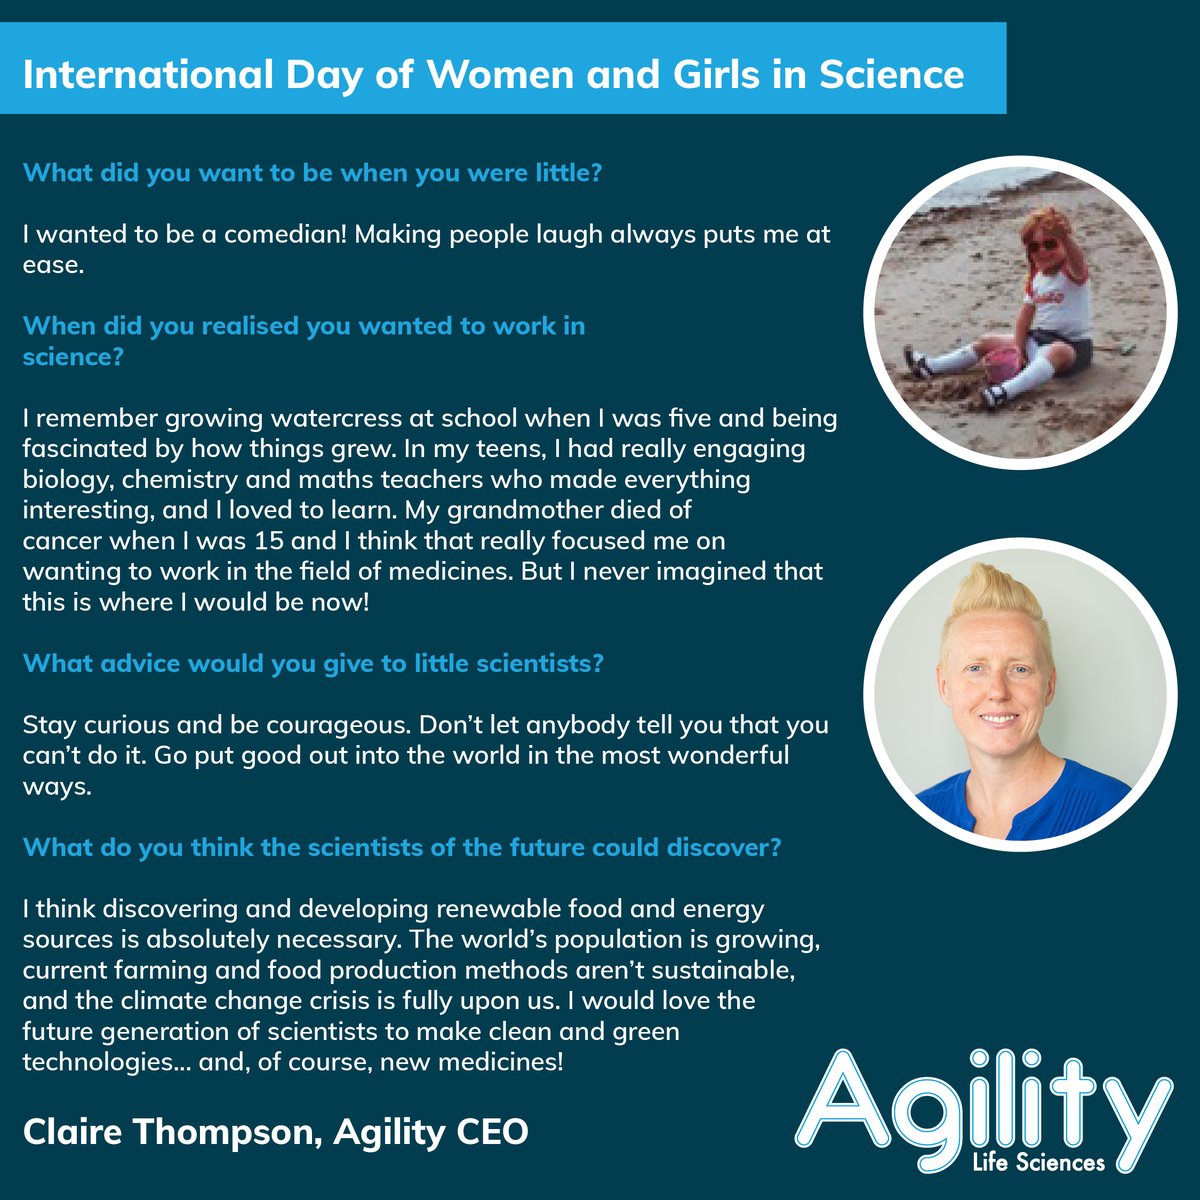 Following @WomenScienceDay on Sunday, our CEO @claire6thompson shares her journey, from growing cress at school to running her own company! Claire advises young scientists to #StayCurious and #BeCourageous and we couldn't put it better ourselves! #February11 #WomenInScience